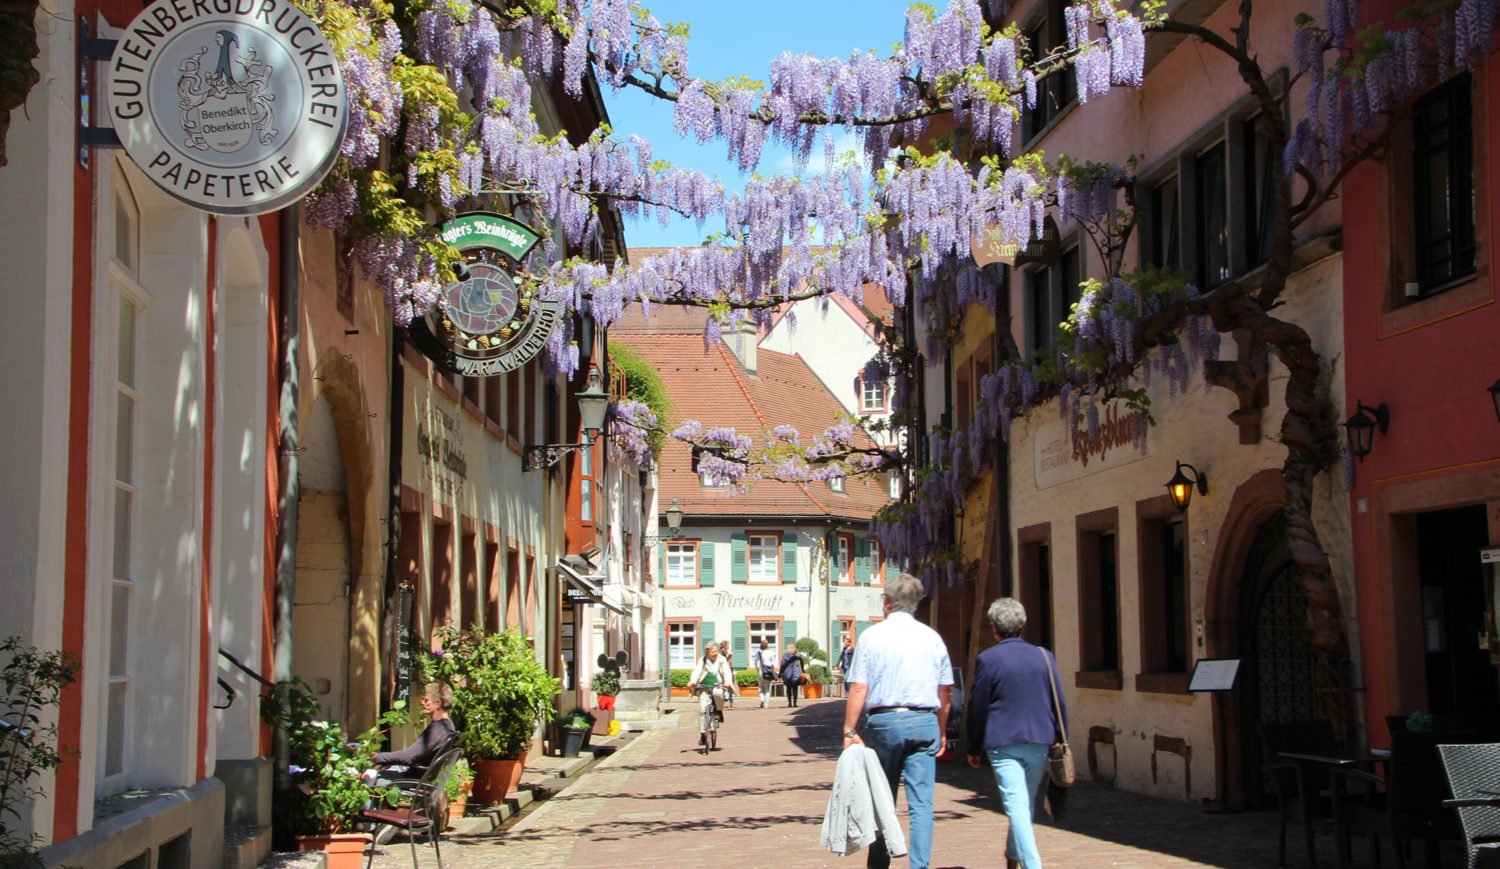 Successful renovation of the old town - Konviktstraße is one of the most beautiful alleys in Freiburg